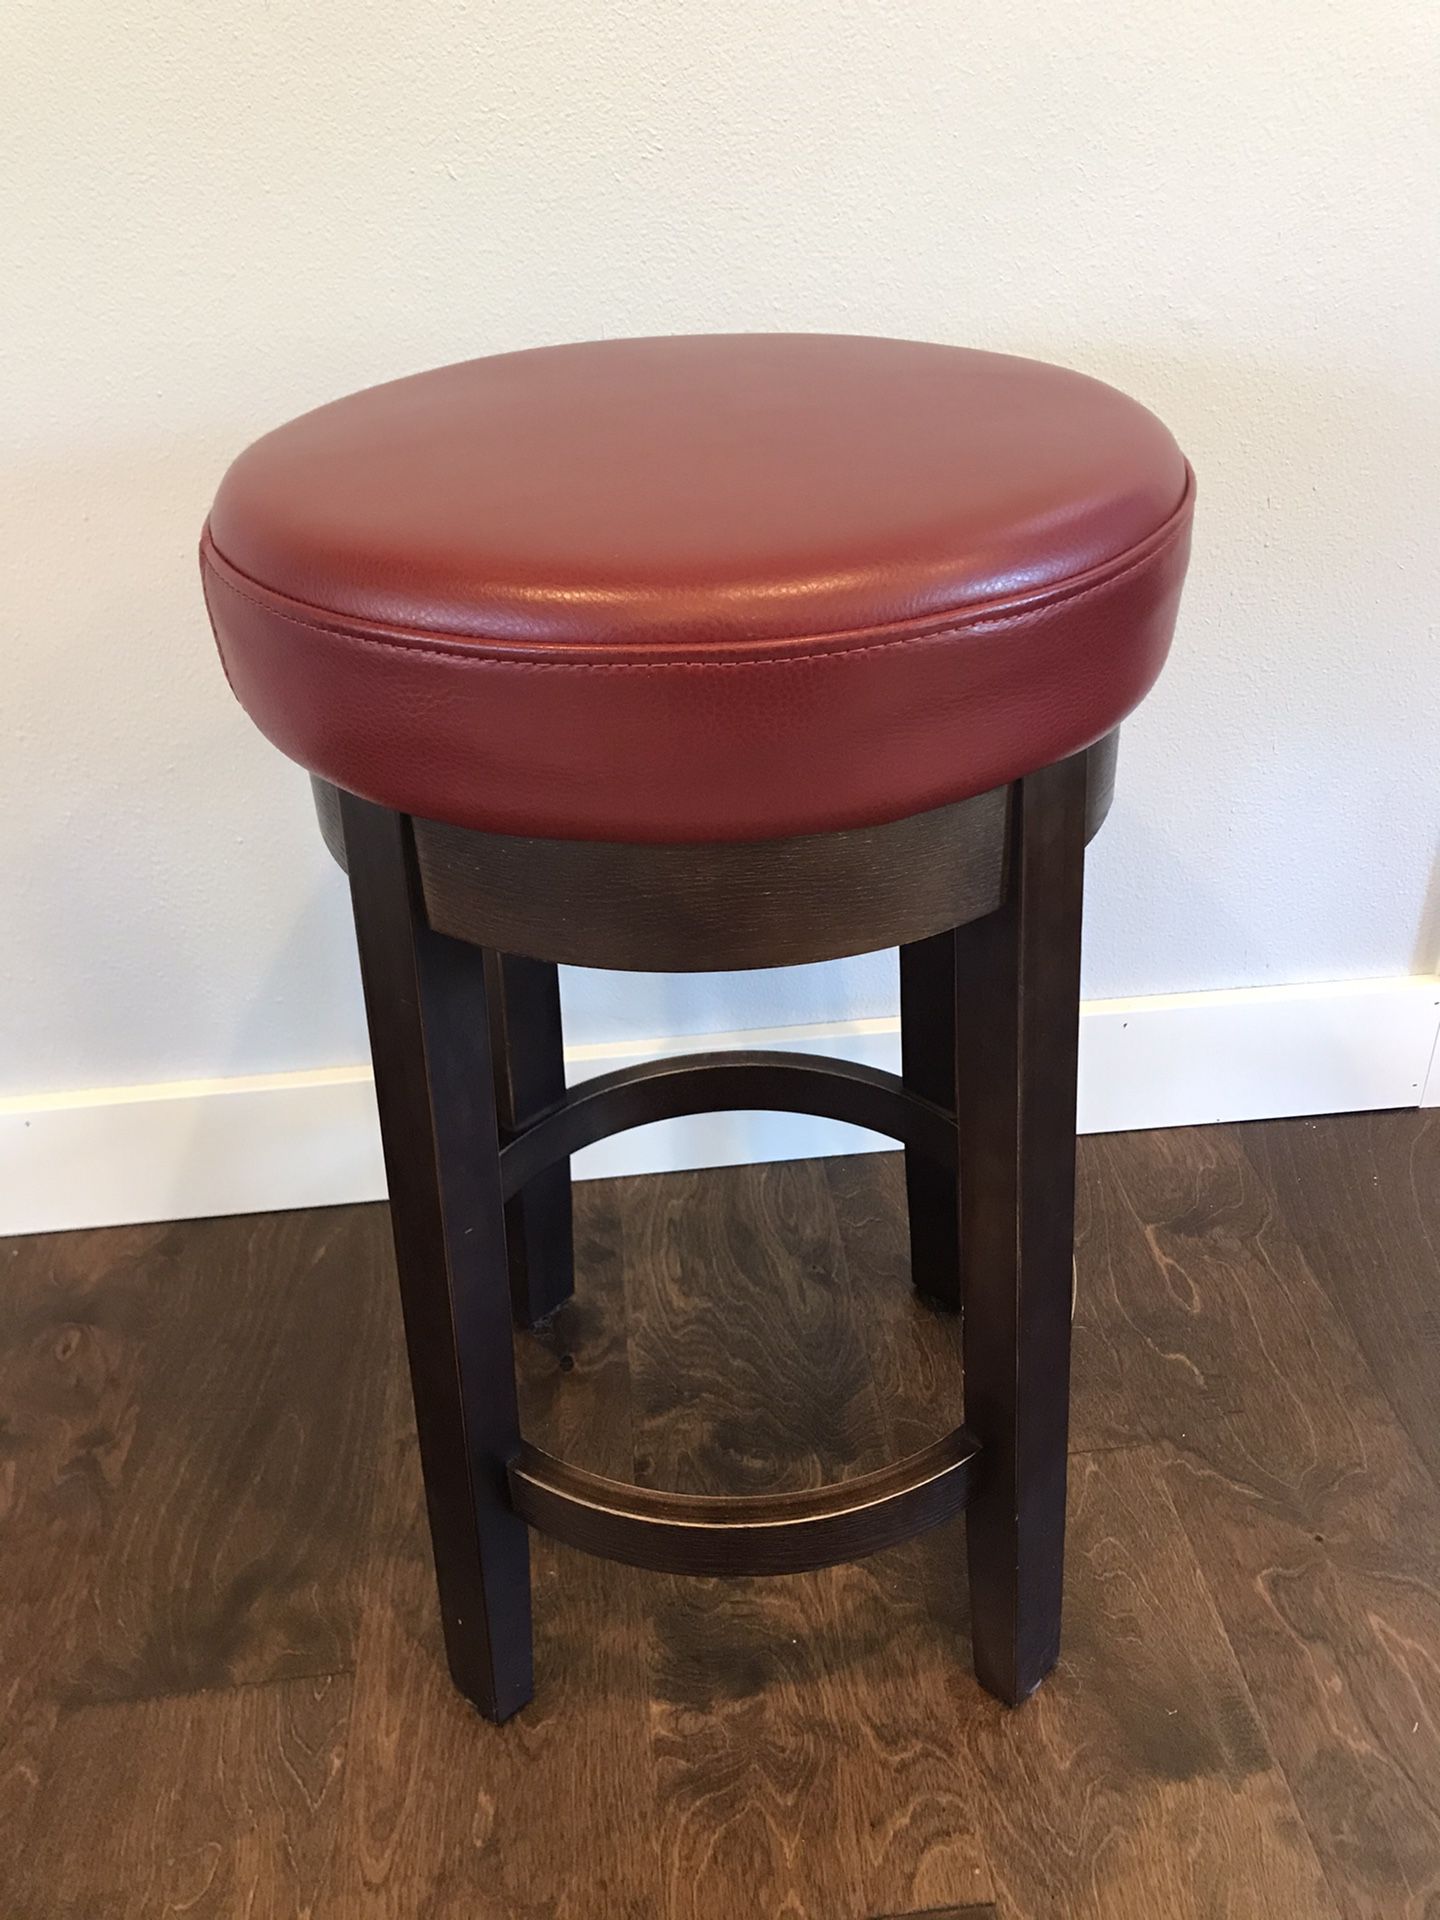 Quality Swivel Top Stool from Dania Furniture